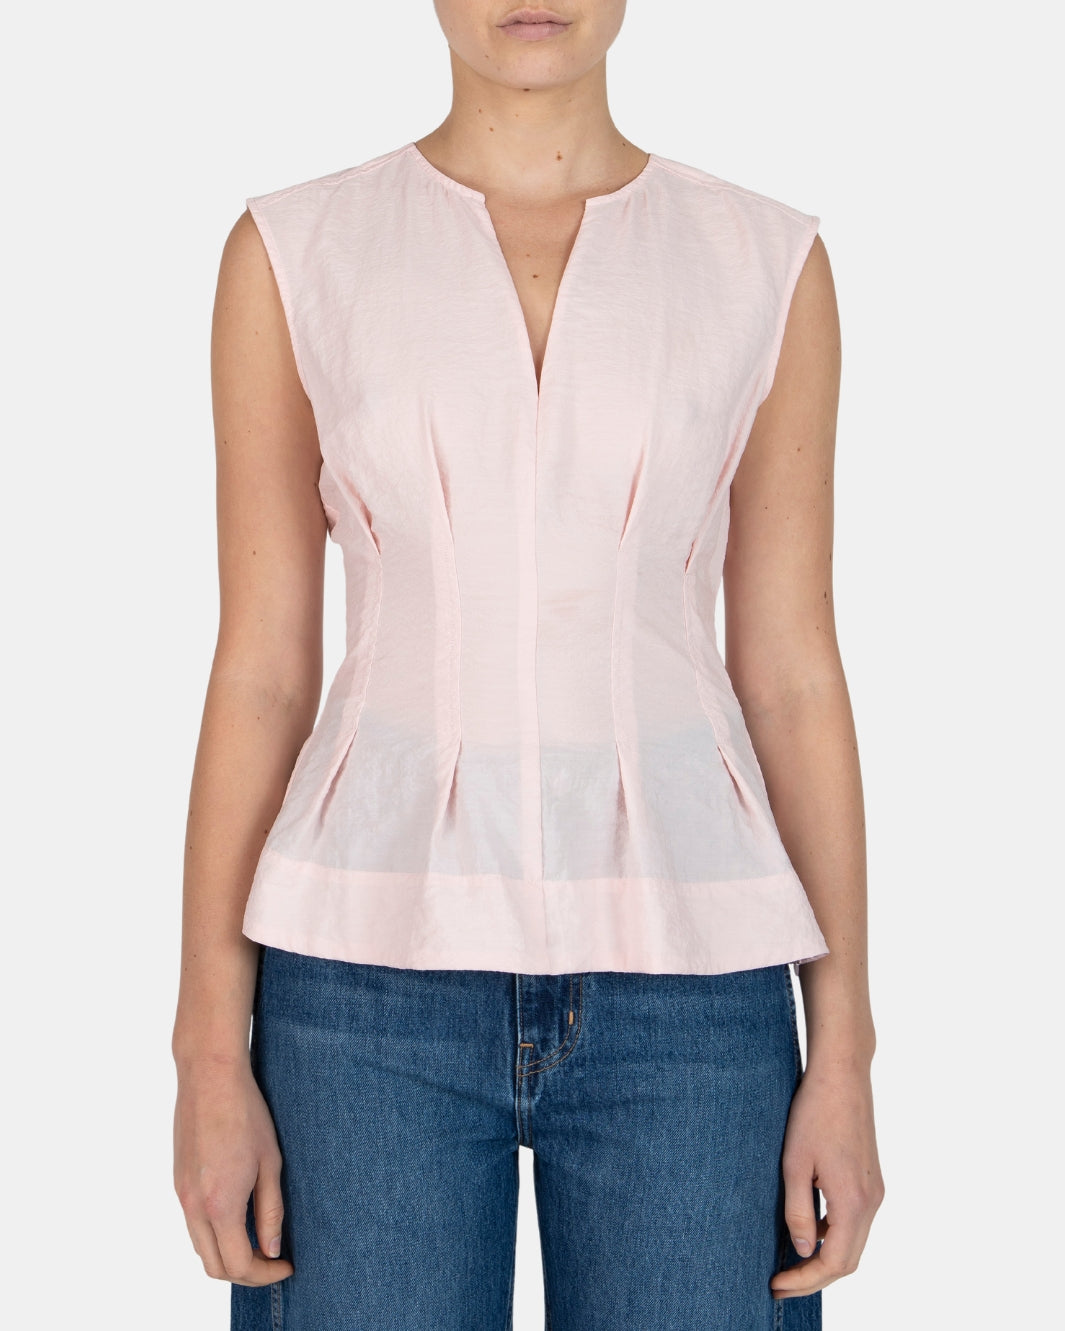 TERESA SLEEVELESS SEAMED TOP IN PINK DOGWOOD - Romi Boutique